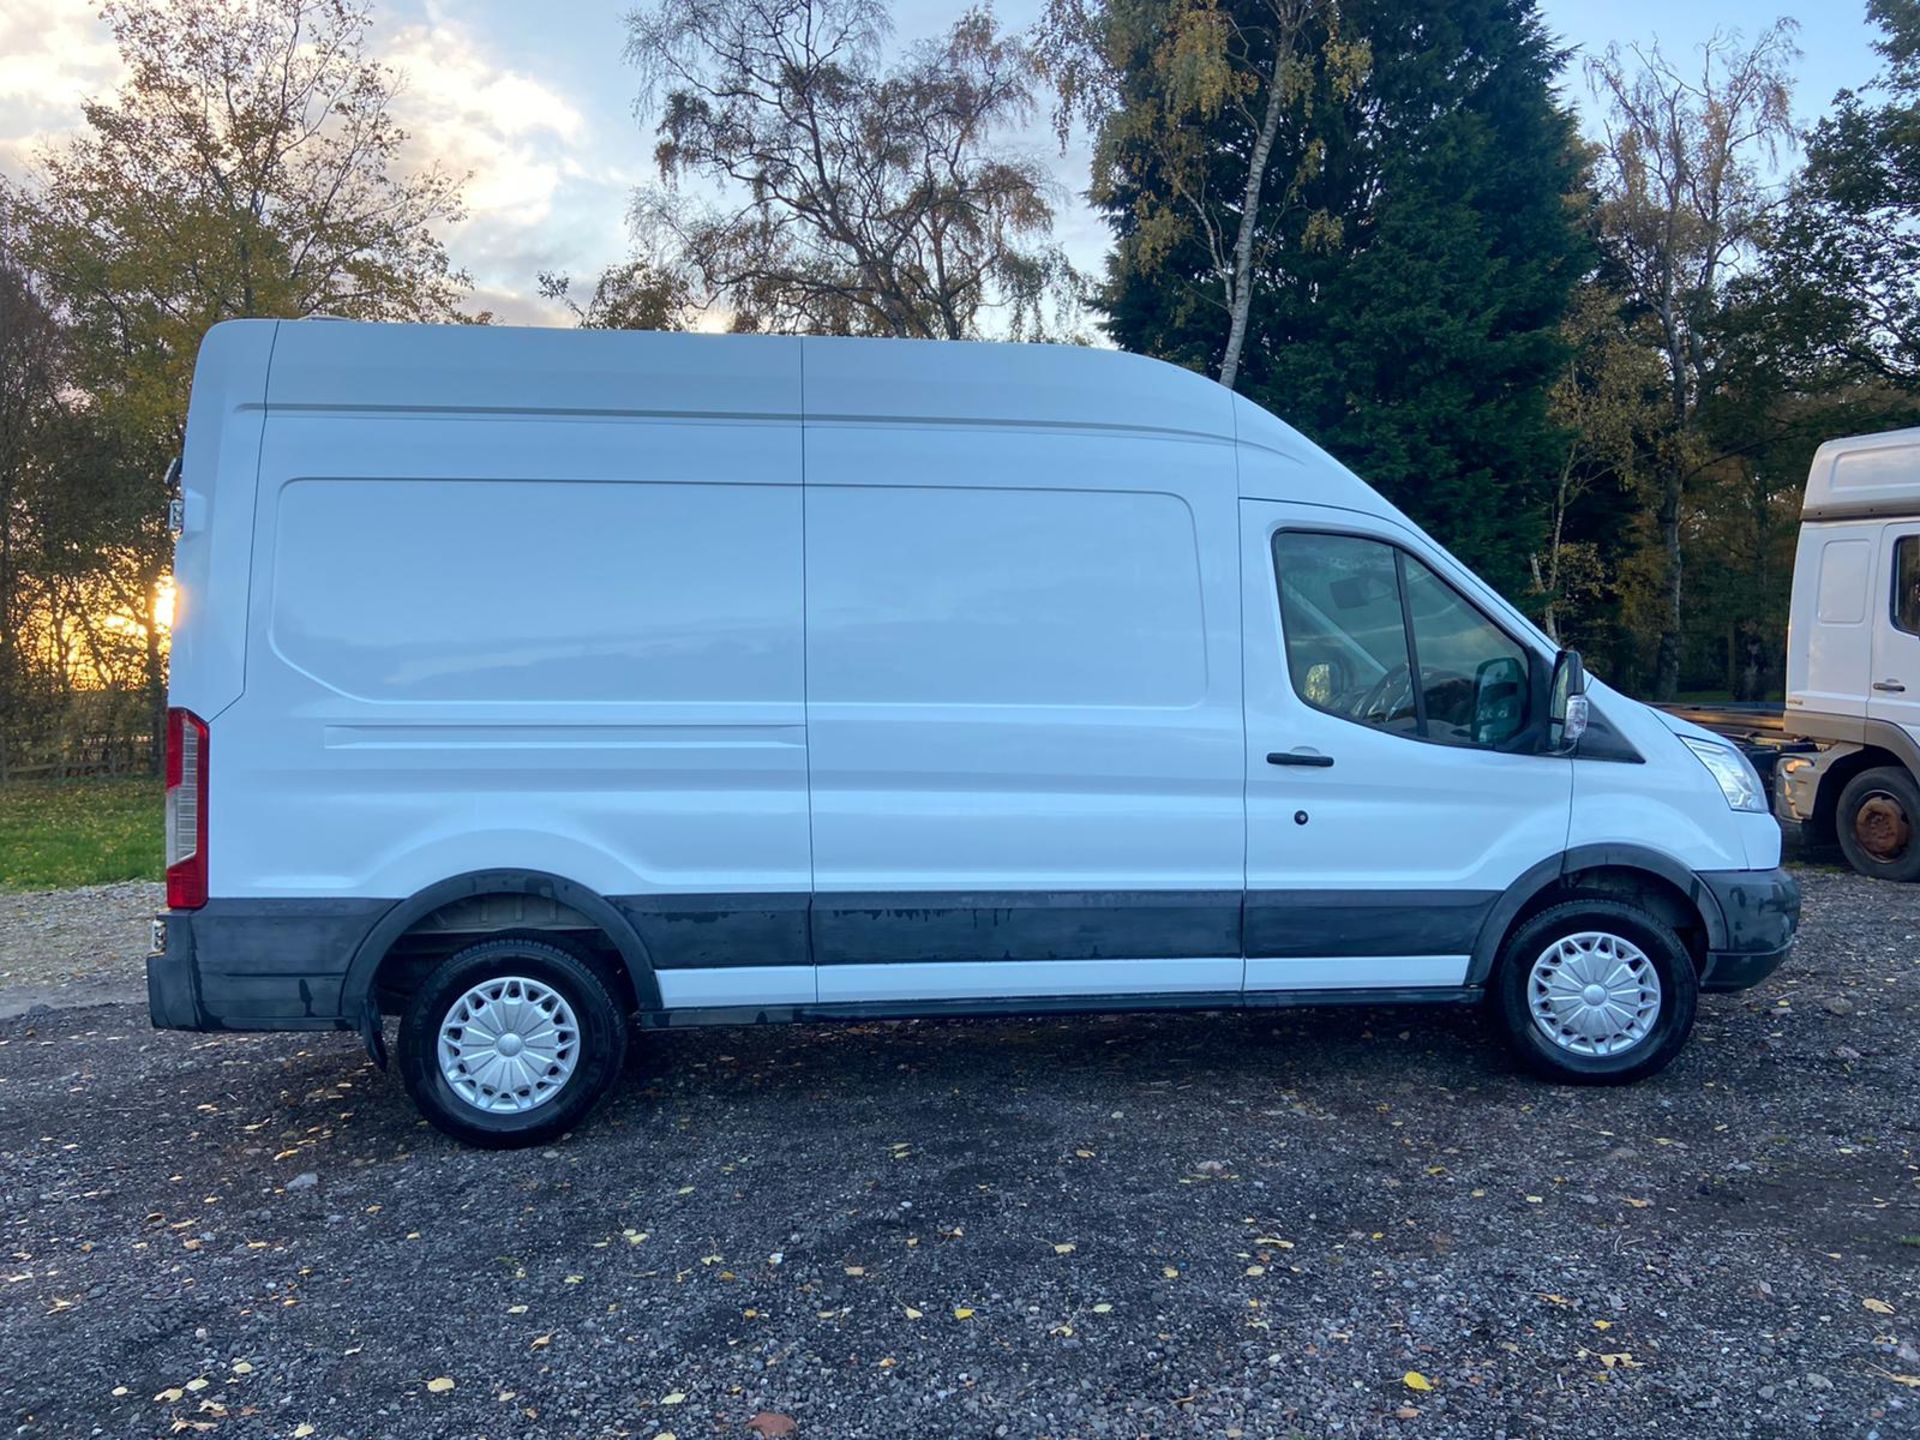 2014/64 REG FORD TRANSIT 350 TREND 2.2 DIESEL, AIR CON, SHOWING 0 FORMER KEEPERS *PLUS VAT* - Image 7 of 12